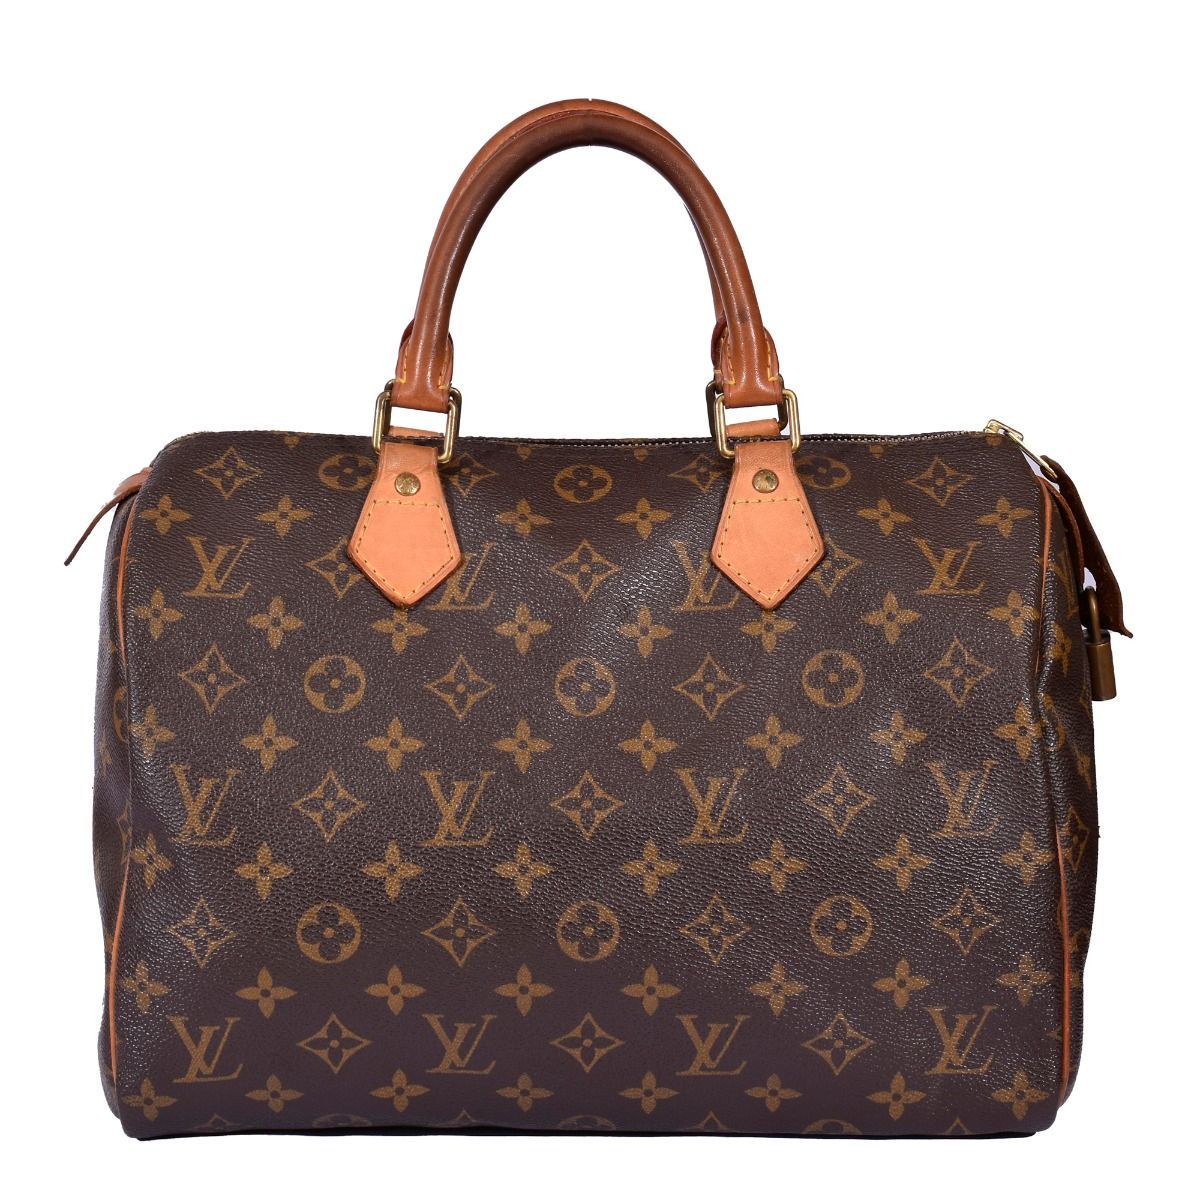 Poshbag Boutique - New-in! This Louis Vuitton Speedy Bandoulière 30 in  Monogram Giant Reverse Canvas is in excellent condition and includes its  original box, dust bag, shoulder strap, lock and keys •